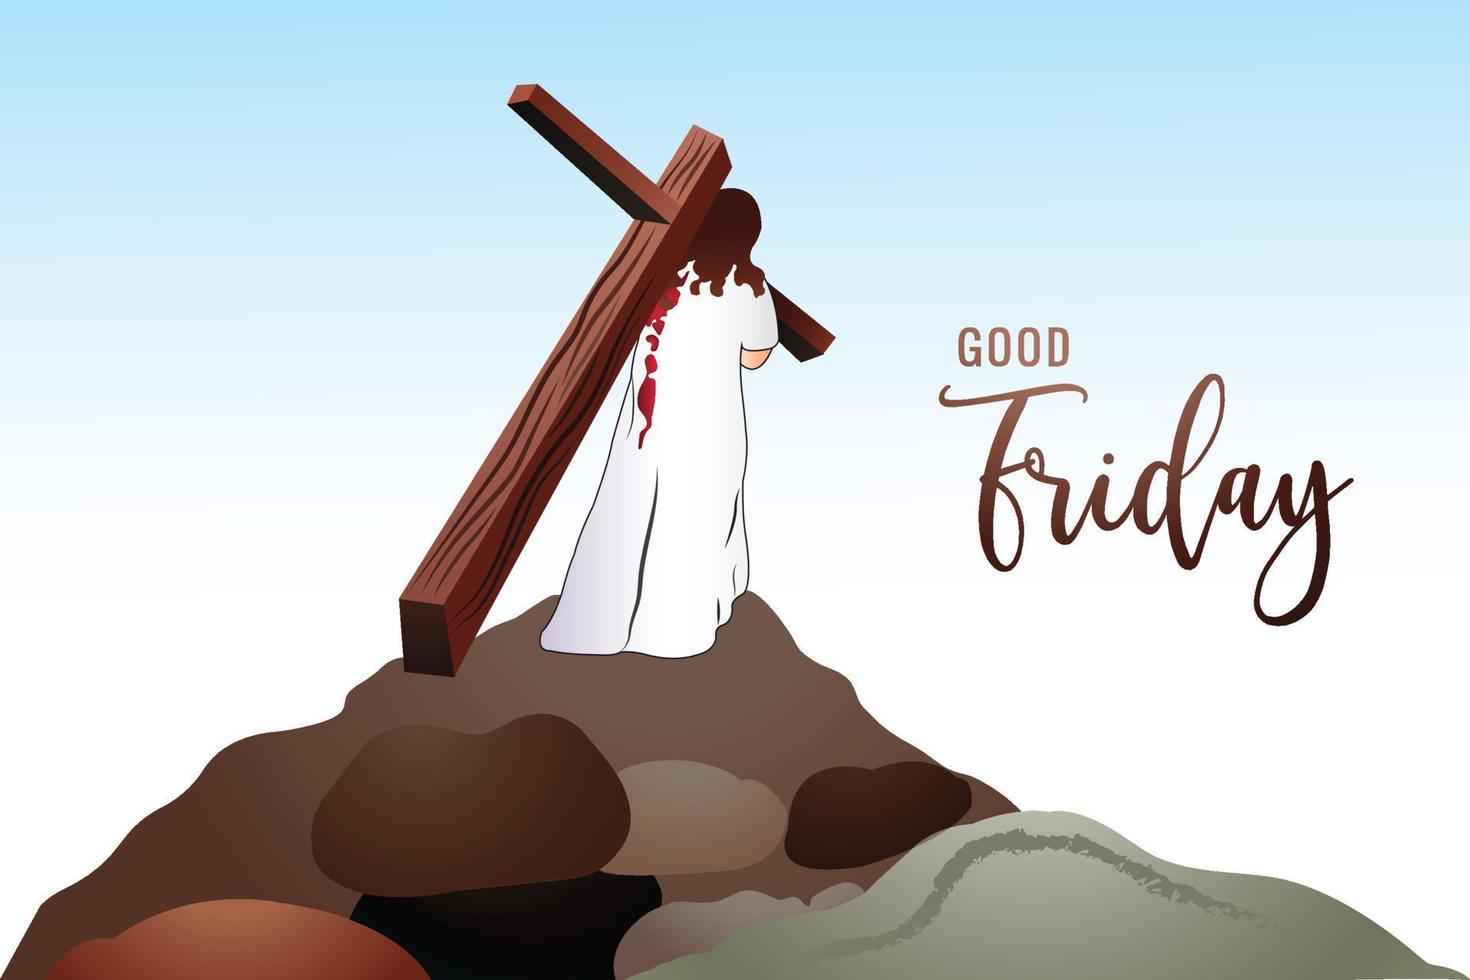 Good friday blessings with jesus carrying cross illustration card background vector